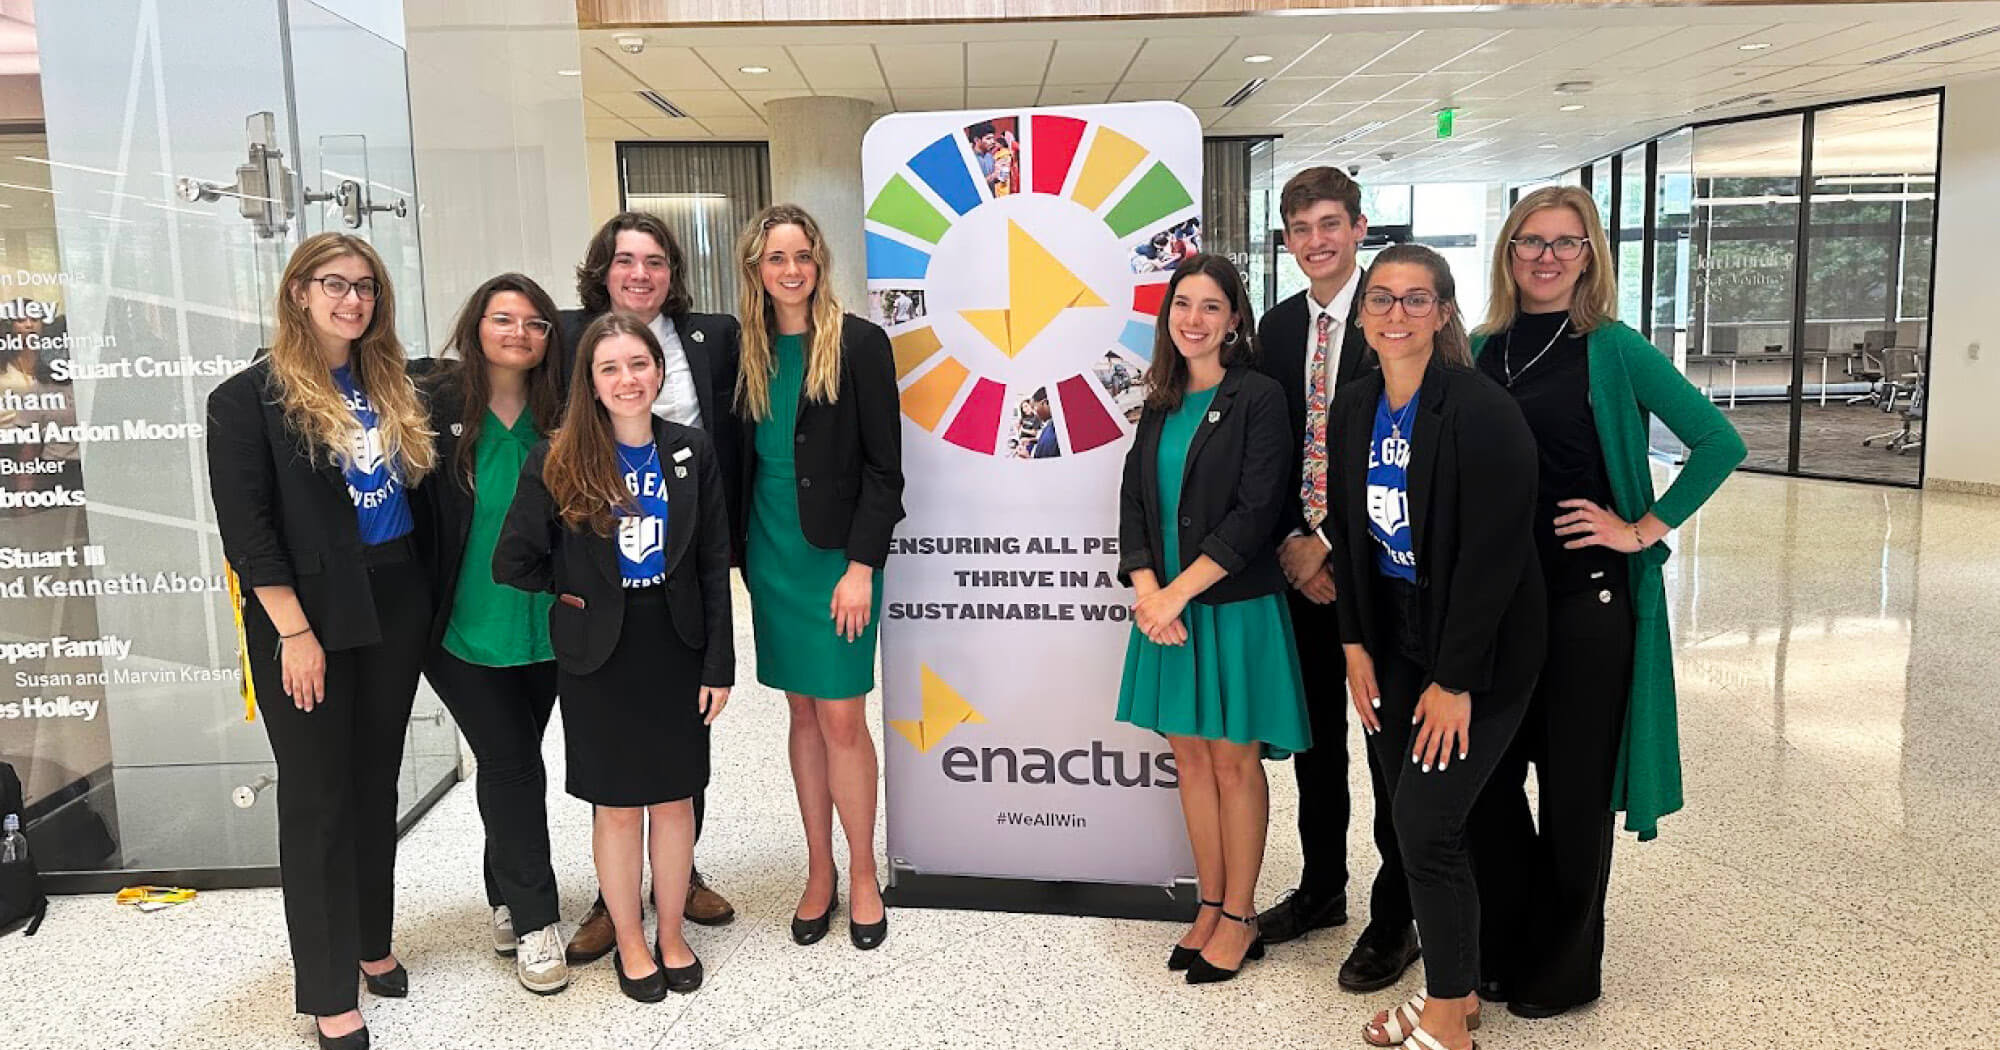 Regent University Enactus team posing together at the National Competition in formal attire.